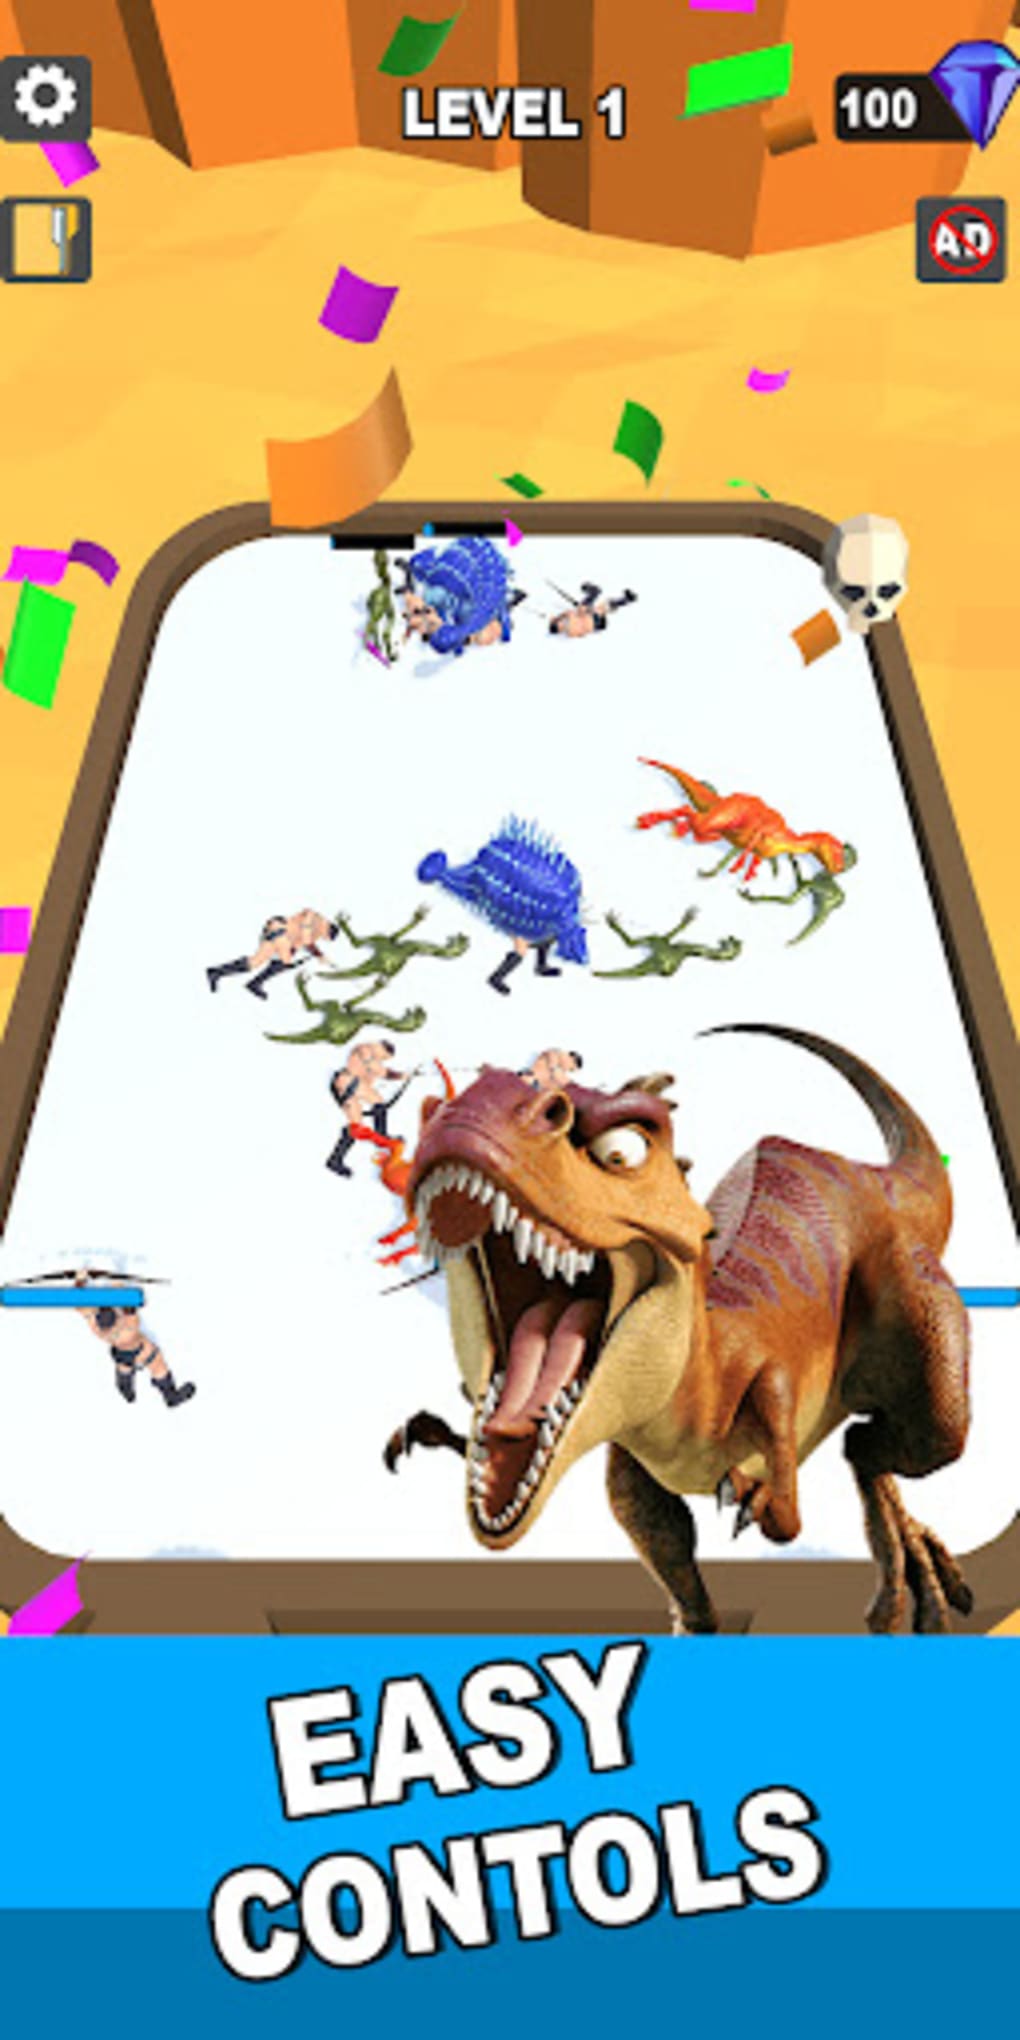 Download Dinosaur Run 3D android on PC